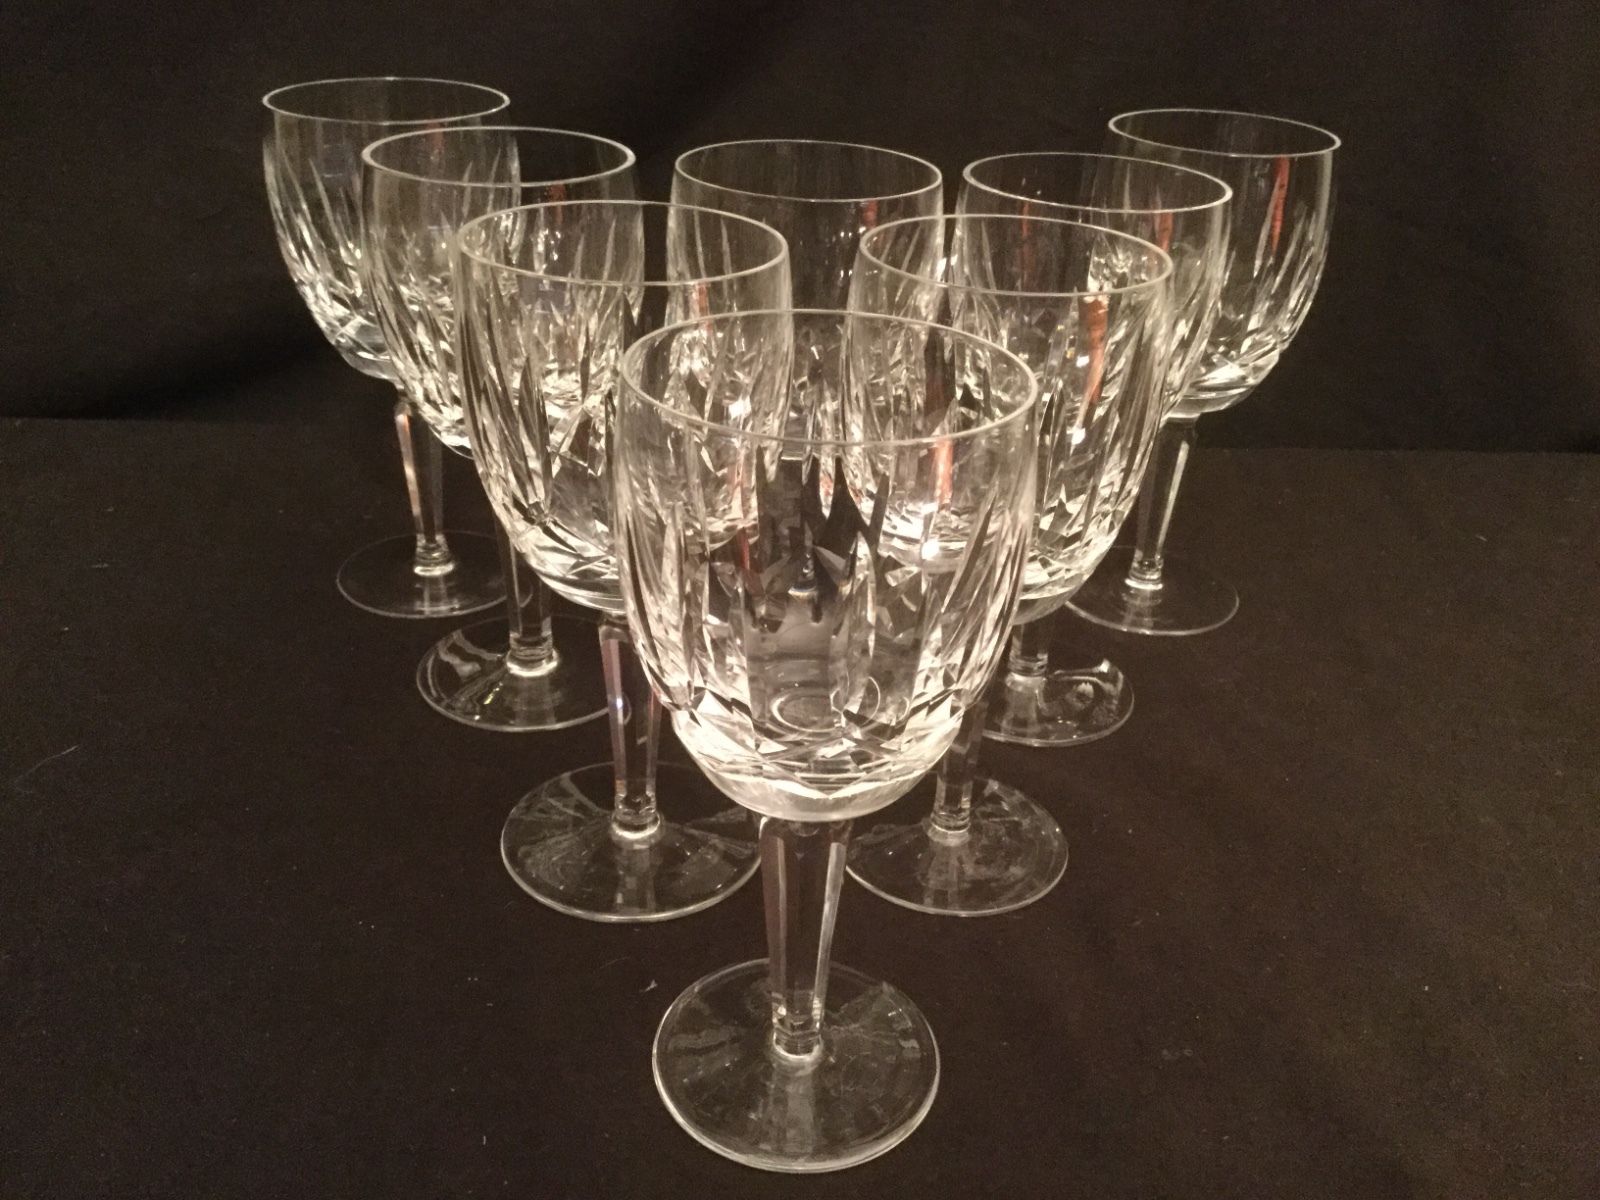 SET OF 8 WATERFORD CRYSTAL WATER GOBLET GLASSES IN THE KILDARE PATTERN